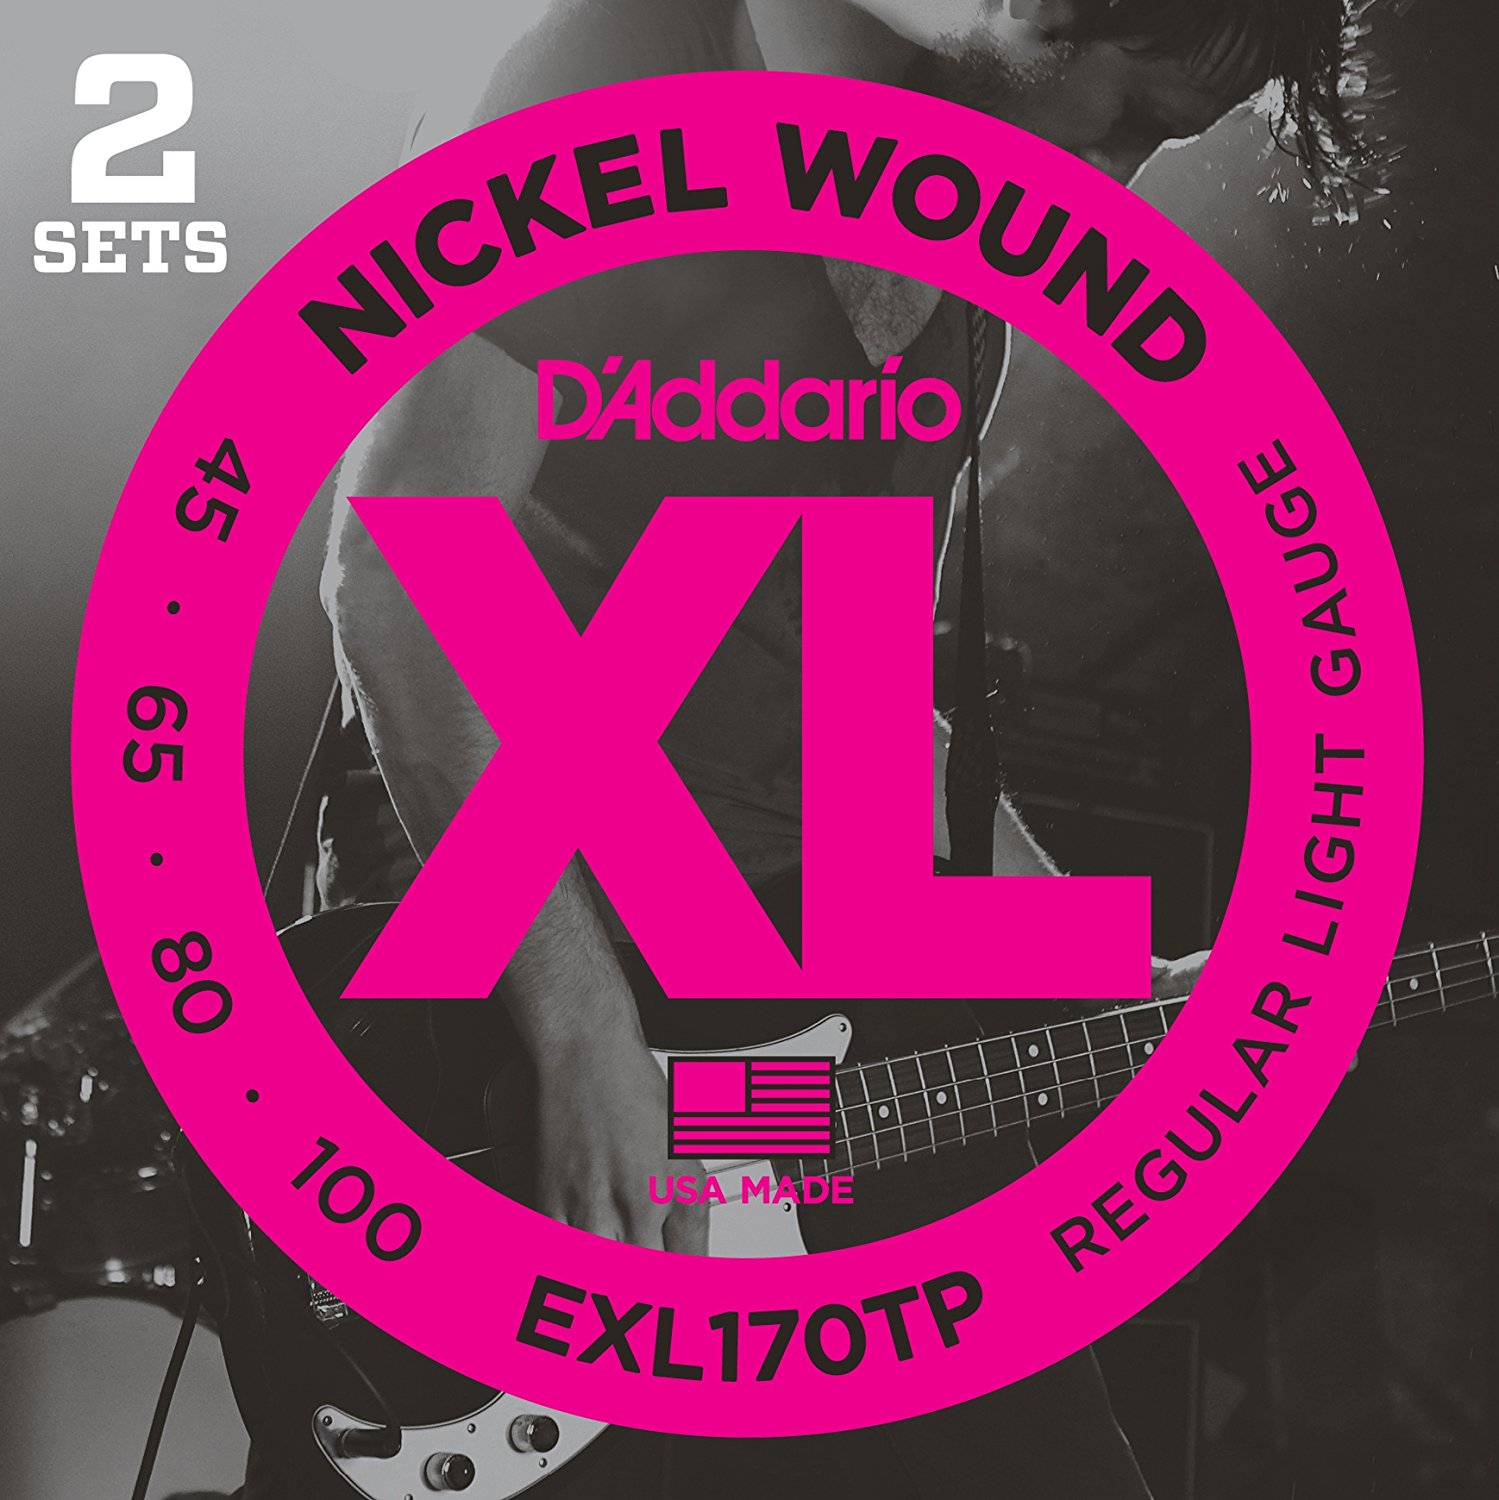 DADRIO D `ADDARIO EXL170TP AMERICAN ALECTRICE ELECTRIC BEDS STRING BES STRING  Ʈ Ʈ